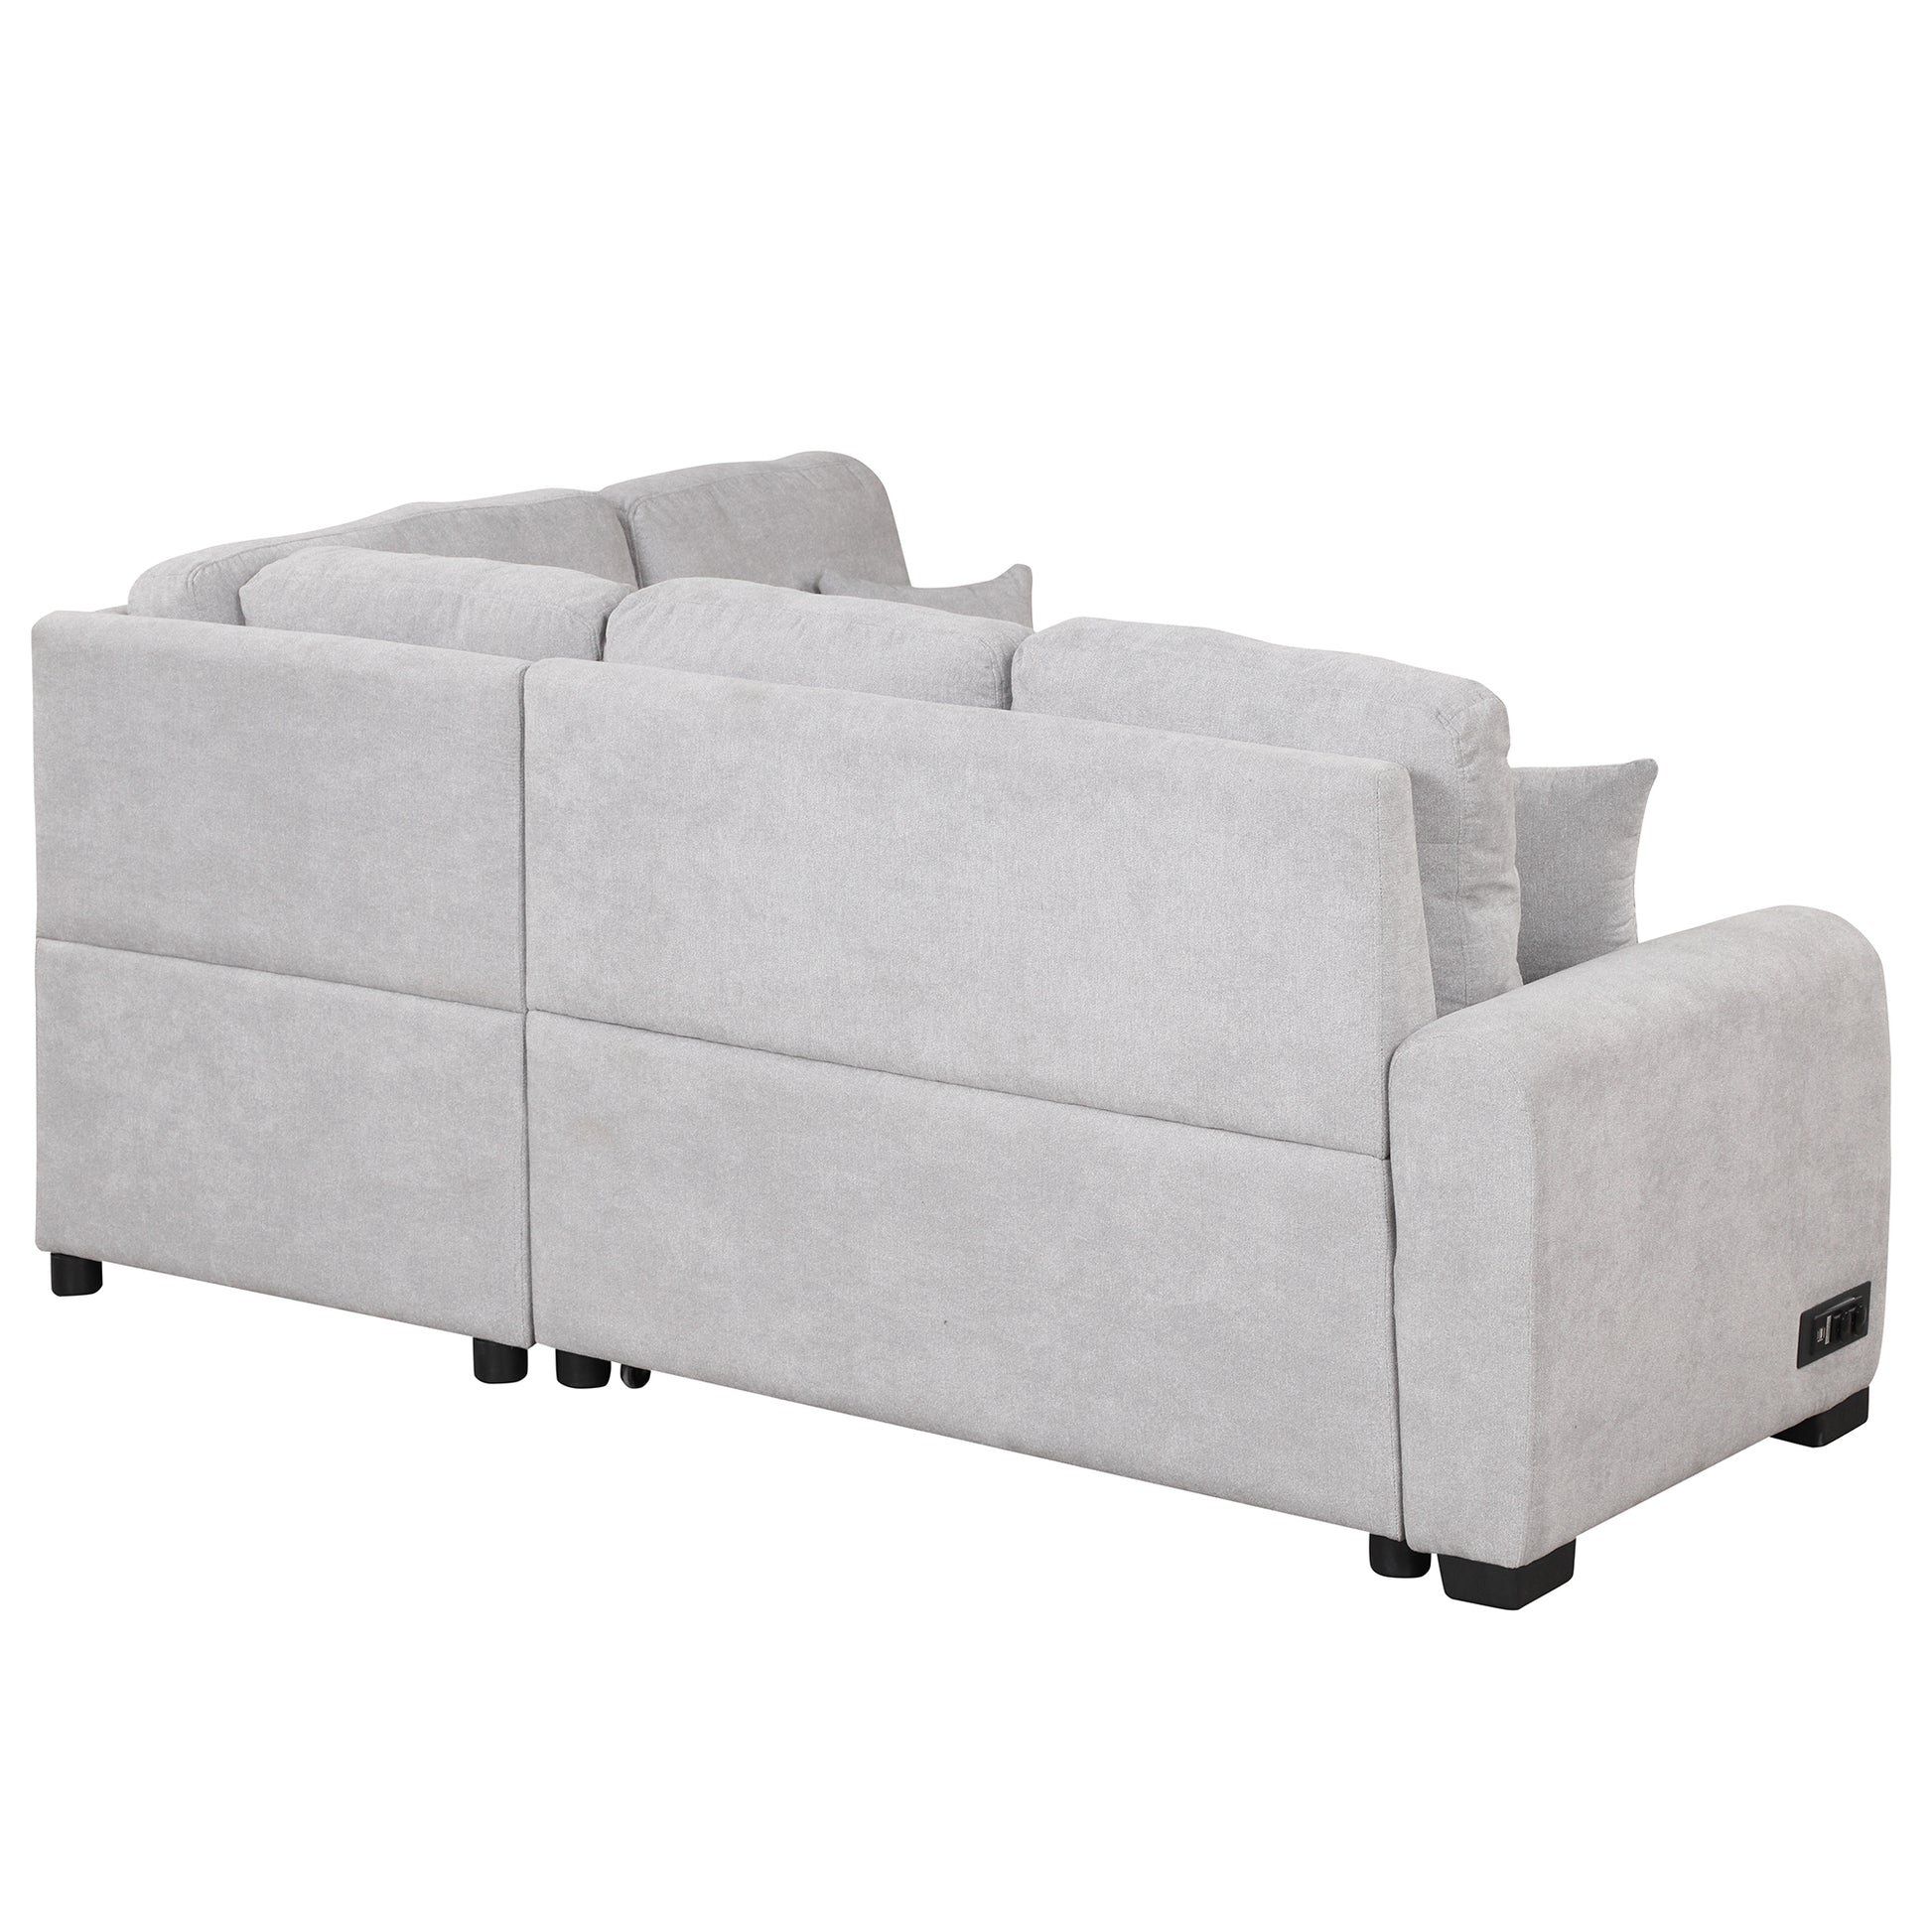 87.4"Sectional Sleeper Sofa with USB Charging Port and grey-foam-chenille